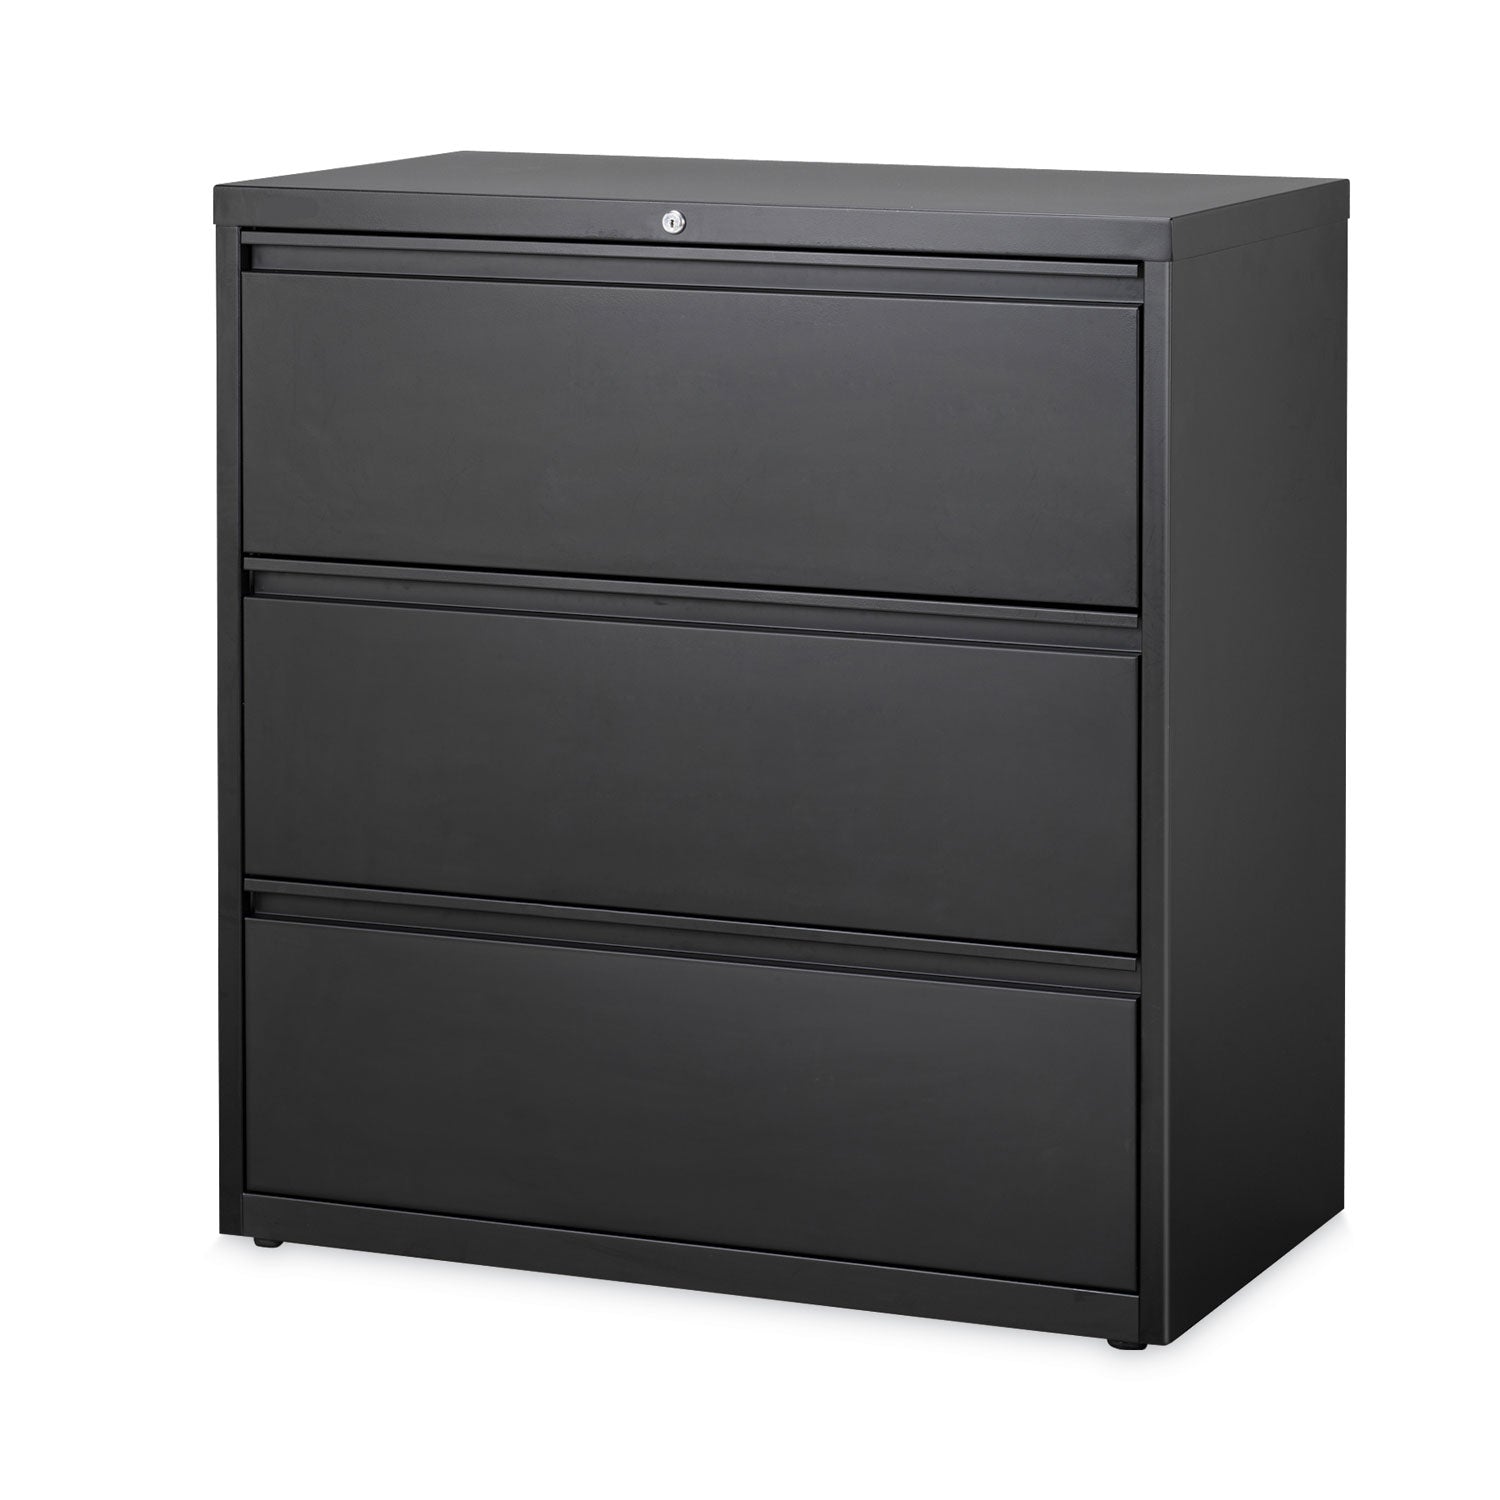 lateral-file-cabinet-3-letter-legal-a4-size-file-drawers-black-36-x-1862-x-4025_hid14986 - 2